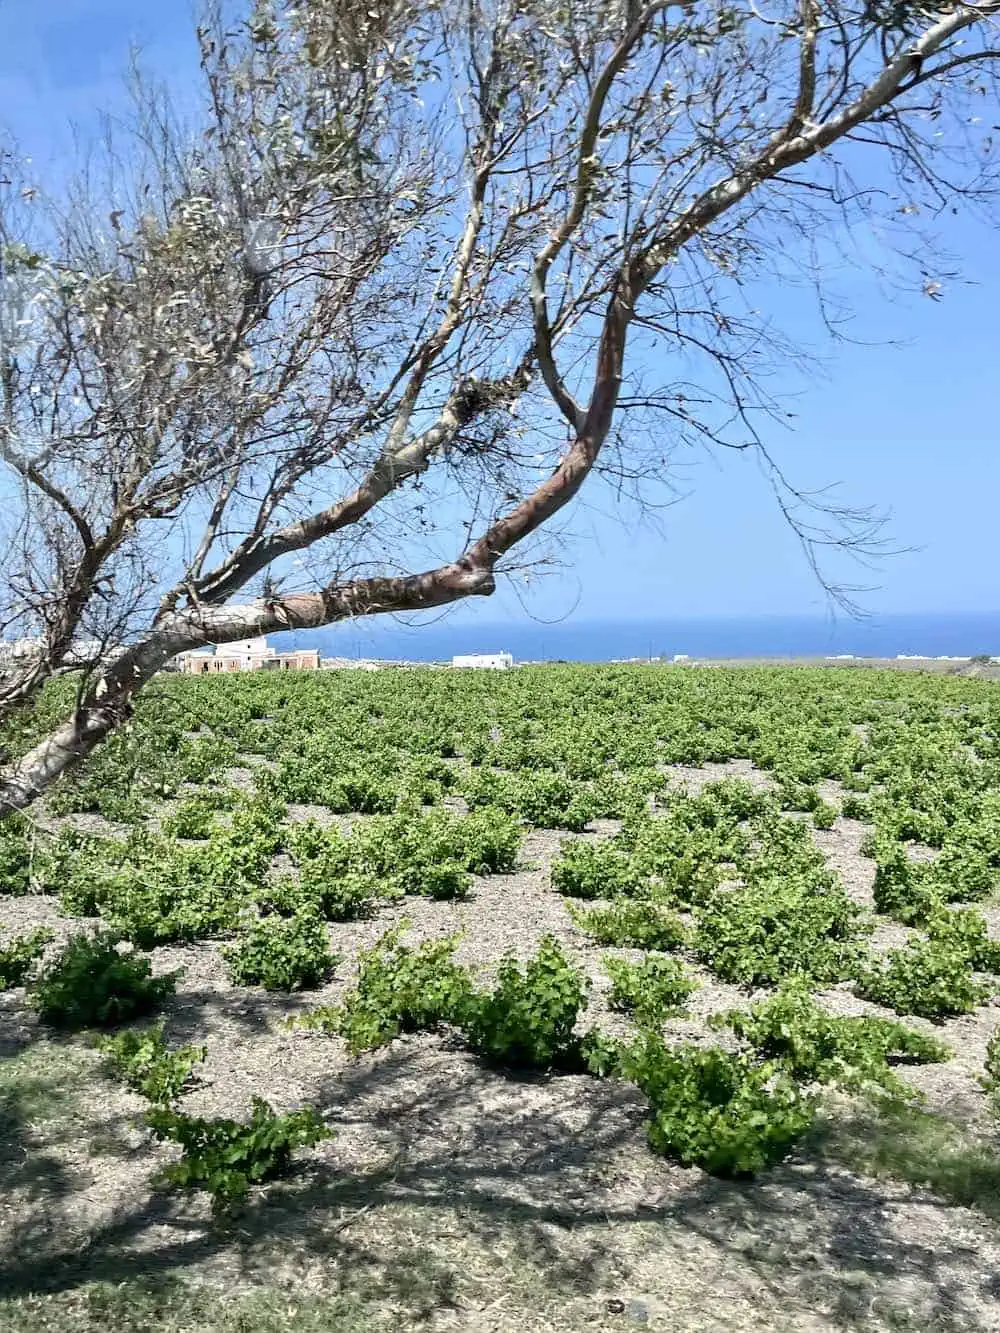 A vineyard in Santorini with low-lying "kouloura" a basket formation close to the ground, providing protection from winds and natural moisture retention.